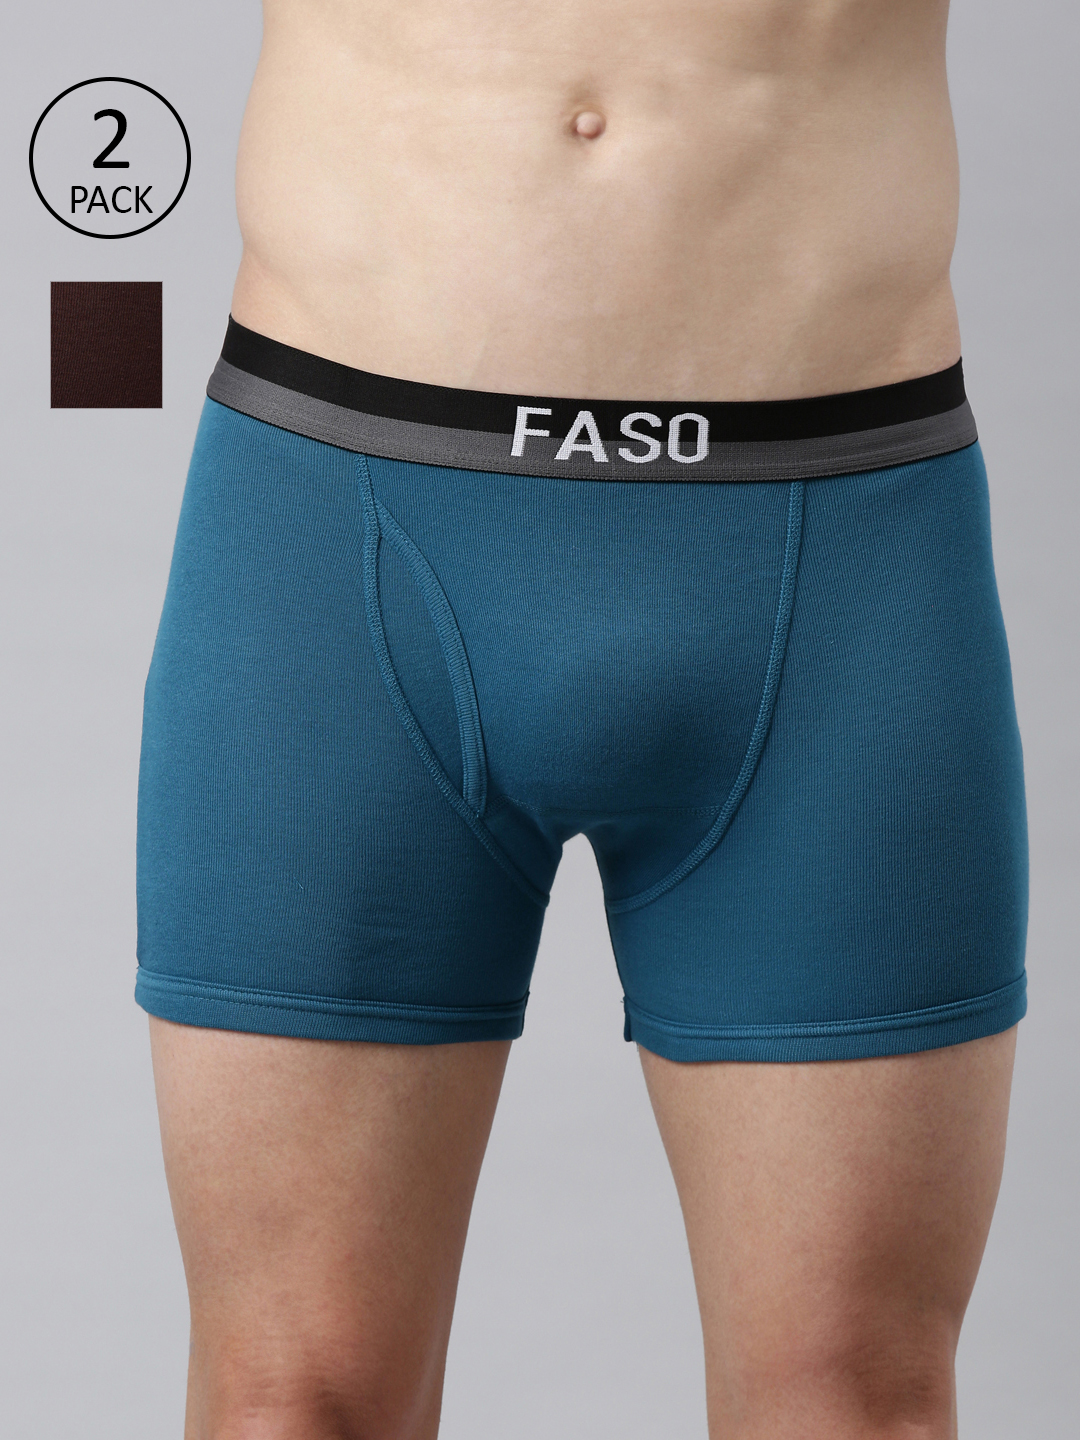 Buy F A S O 100% Cotton Brief for Men, Trendy Soft Stretch Fabric Innerwear, Outer Elastic Twin Layered Underwear for Mens, Solid Ultra-Light Comfort  Fit Briefs